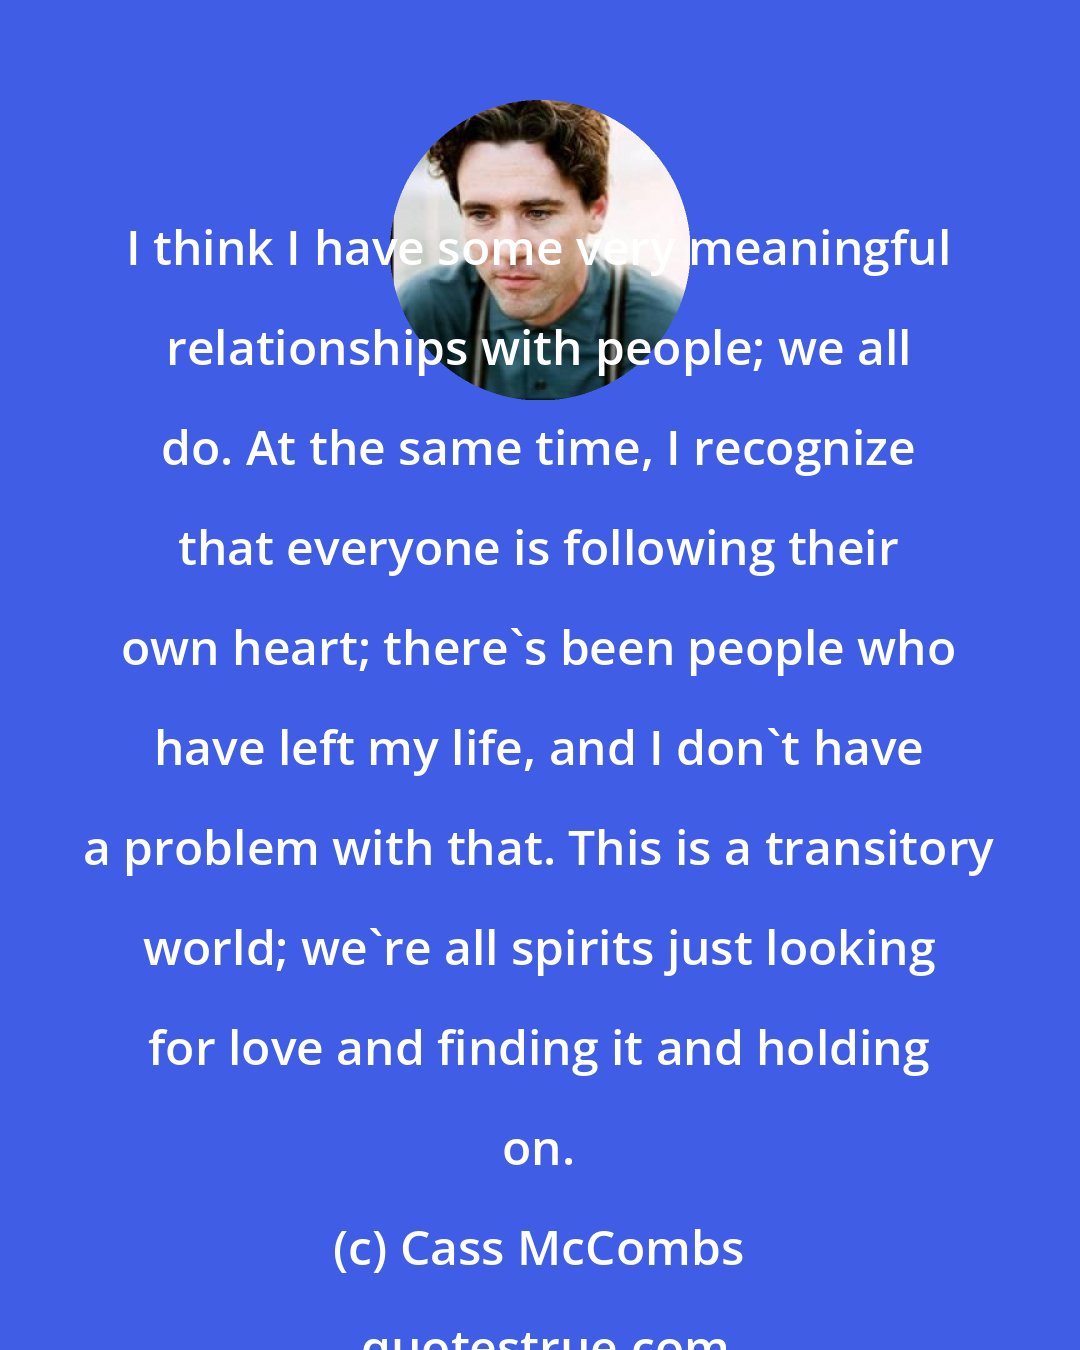 Cass McCombs: I think I have some very meaningful relationships with people; we all do. At the same time, I recognize that everyone is following their own heart; there's been people who have left my life, and I don't have a problem with that. This is a transitory world; we're all spirits just looking for love and finding it and holding on.